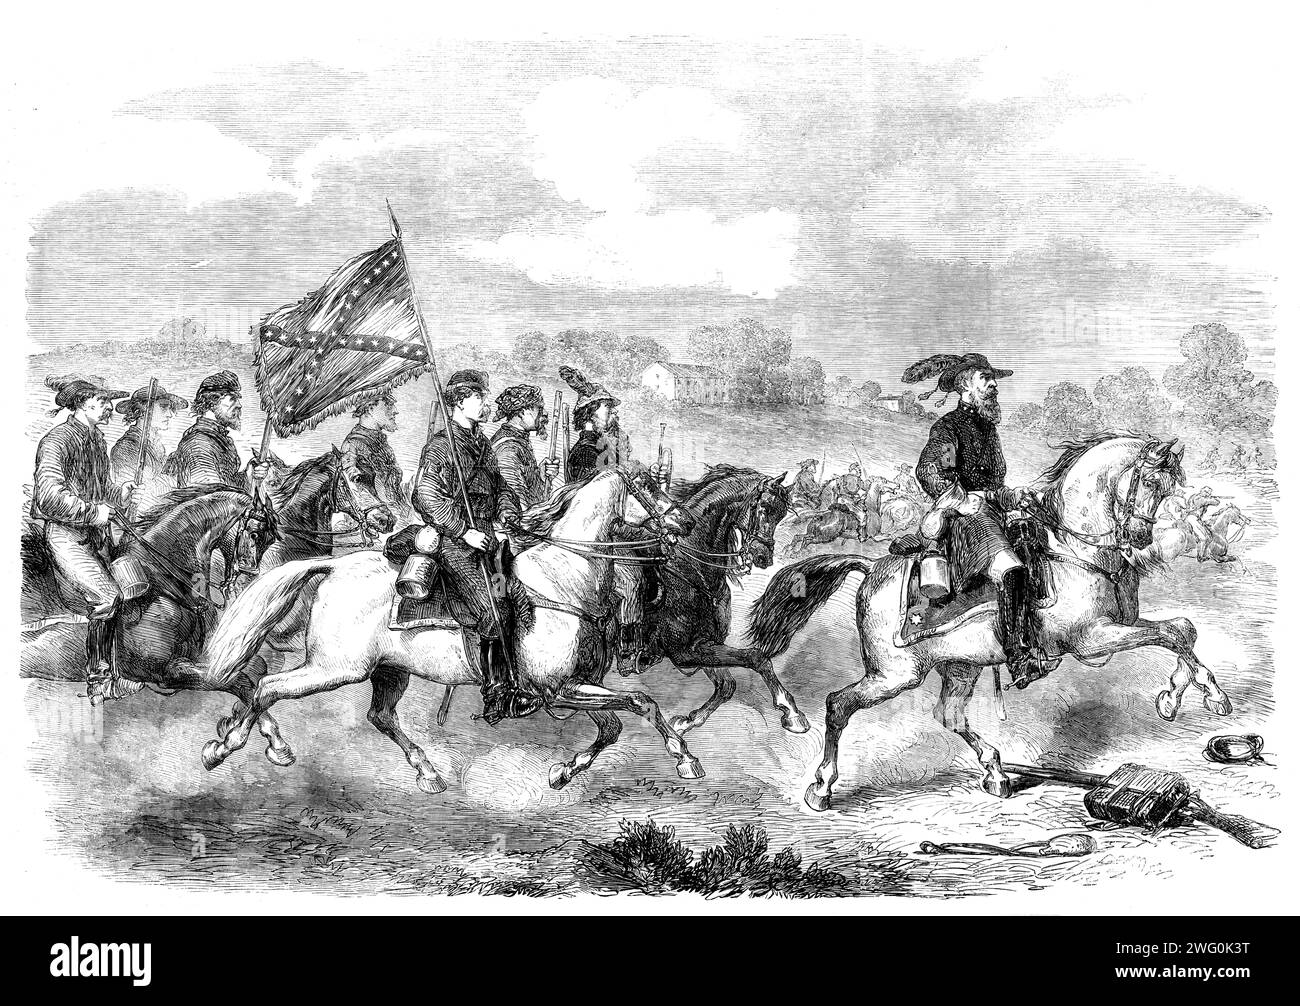 The Civil War in America: General Stuart (Confederate) with his cavalry scouting in the neighbourhood of Culpepper Courthouse - from a sketch by our special artist, 1862. 'Our Special Artist in America has sent to us an illustration...showing the Confederate scouting party under General Stuart, skirmishing with a portion of General Pope's army in the neighbourhood of Culpepper Courthouse. General Stuart's fame reached England after his marvellous raid round the extreme right of M'Clellan's army, whilst the latter was threatening Richmond. It is unnecessary to remind our readers of this gallant Stock Photo